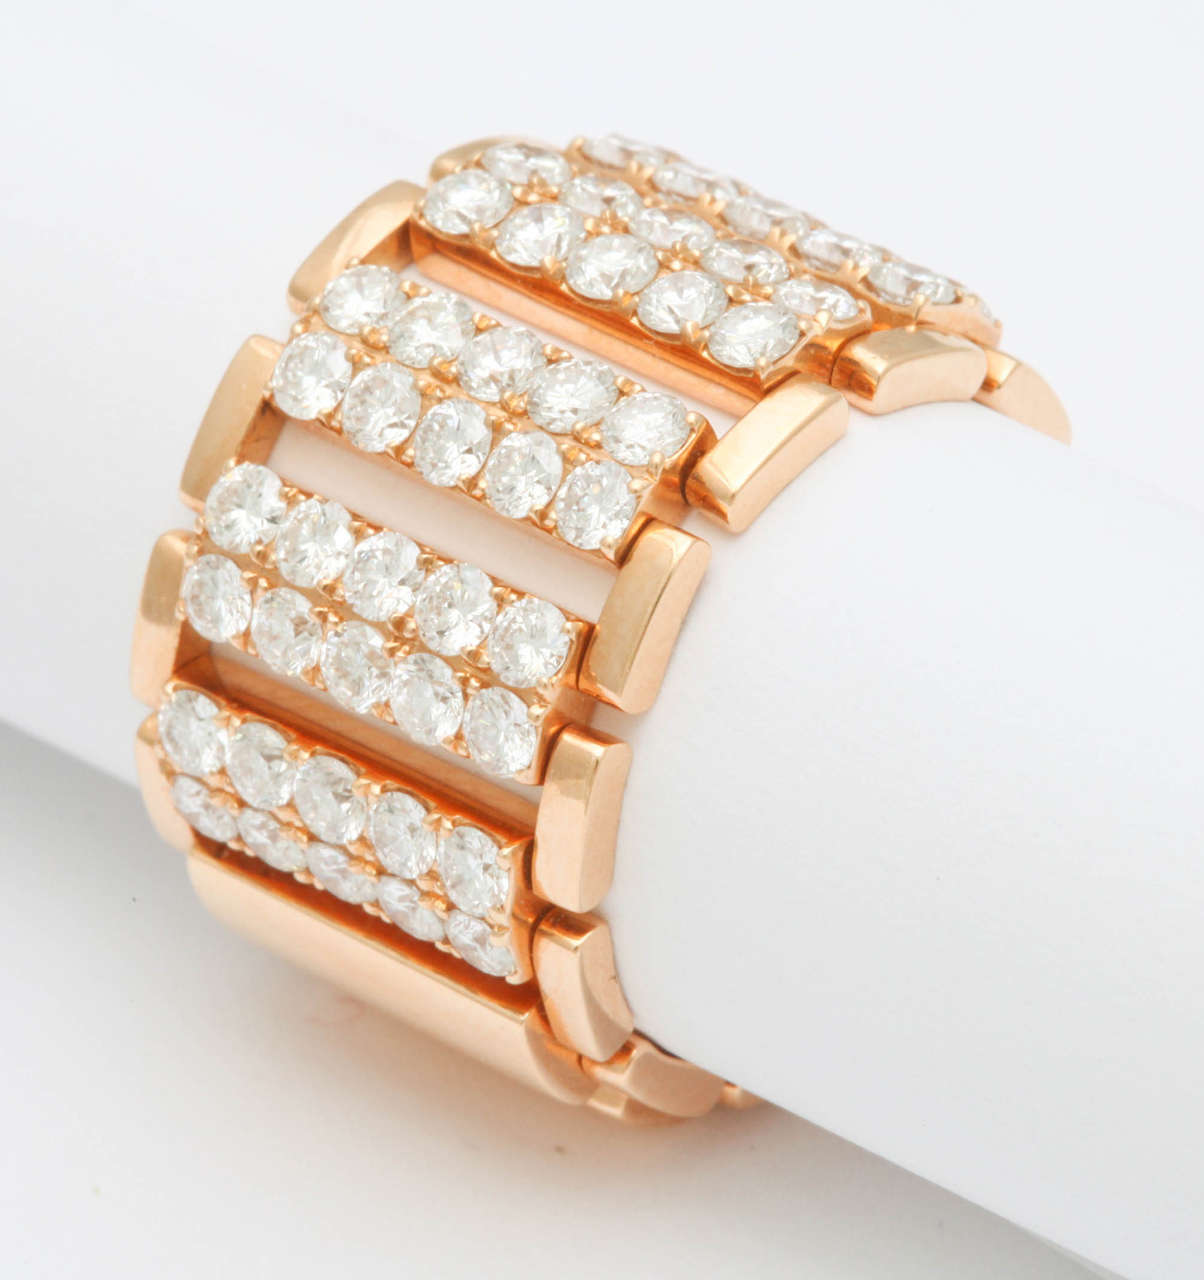 Italian 14k  rose gold flexible ring featuring 50 round cut brilliant diamonds, weighing 2.22 carats. Very well made!

Can be ordered in any size and color.